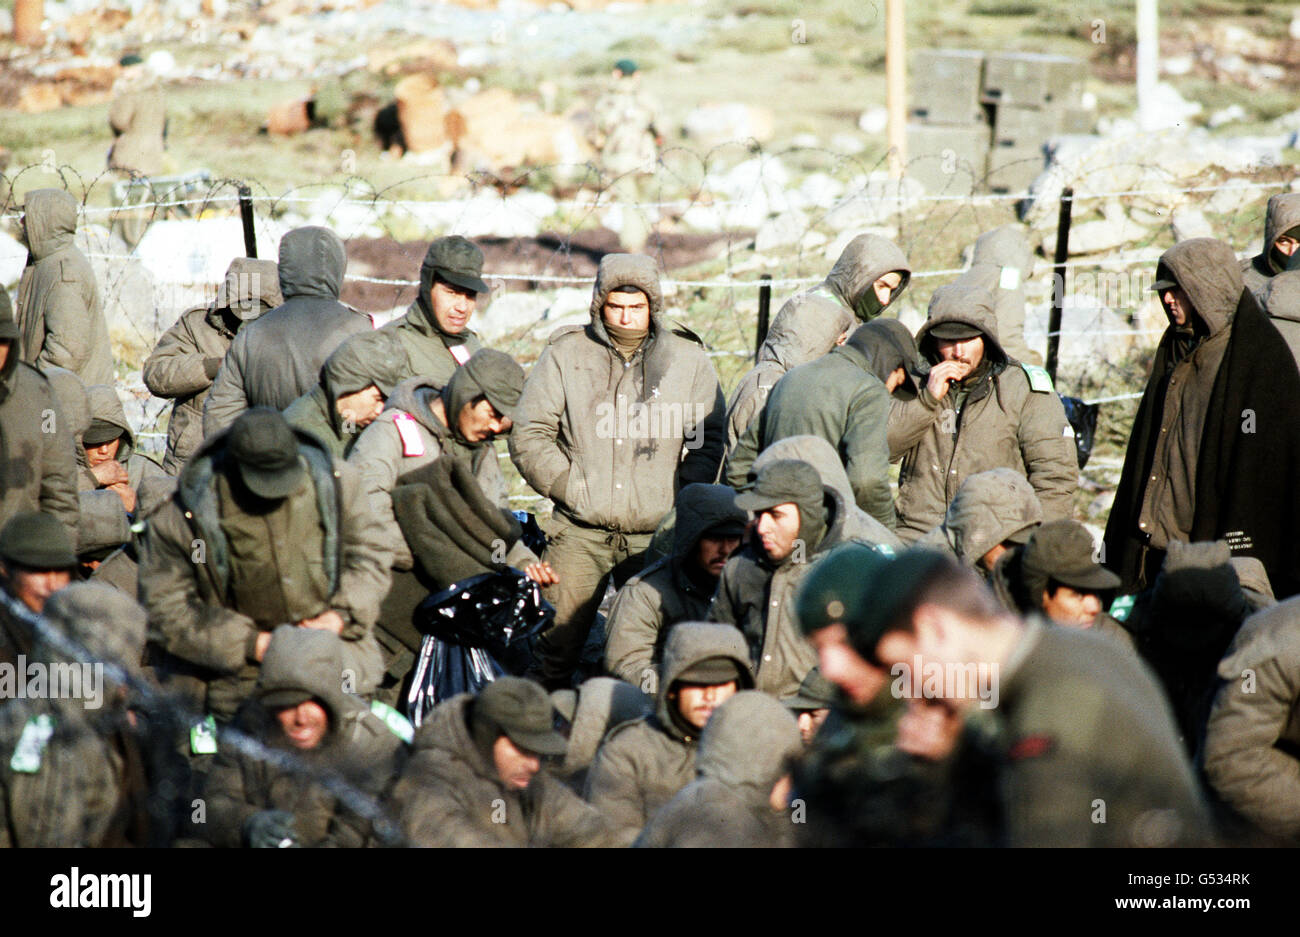 THE FALKLANDS WAR : Argentine prisoners of war, captured during the establishment of a bridgehead at San Carlos Water, are guarded by Royal Marines (foreground) in a barbed wire compound. The bridgehead was established on May 21st by British Falkland Islands Task Force troops. Stock Photo